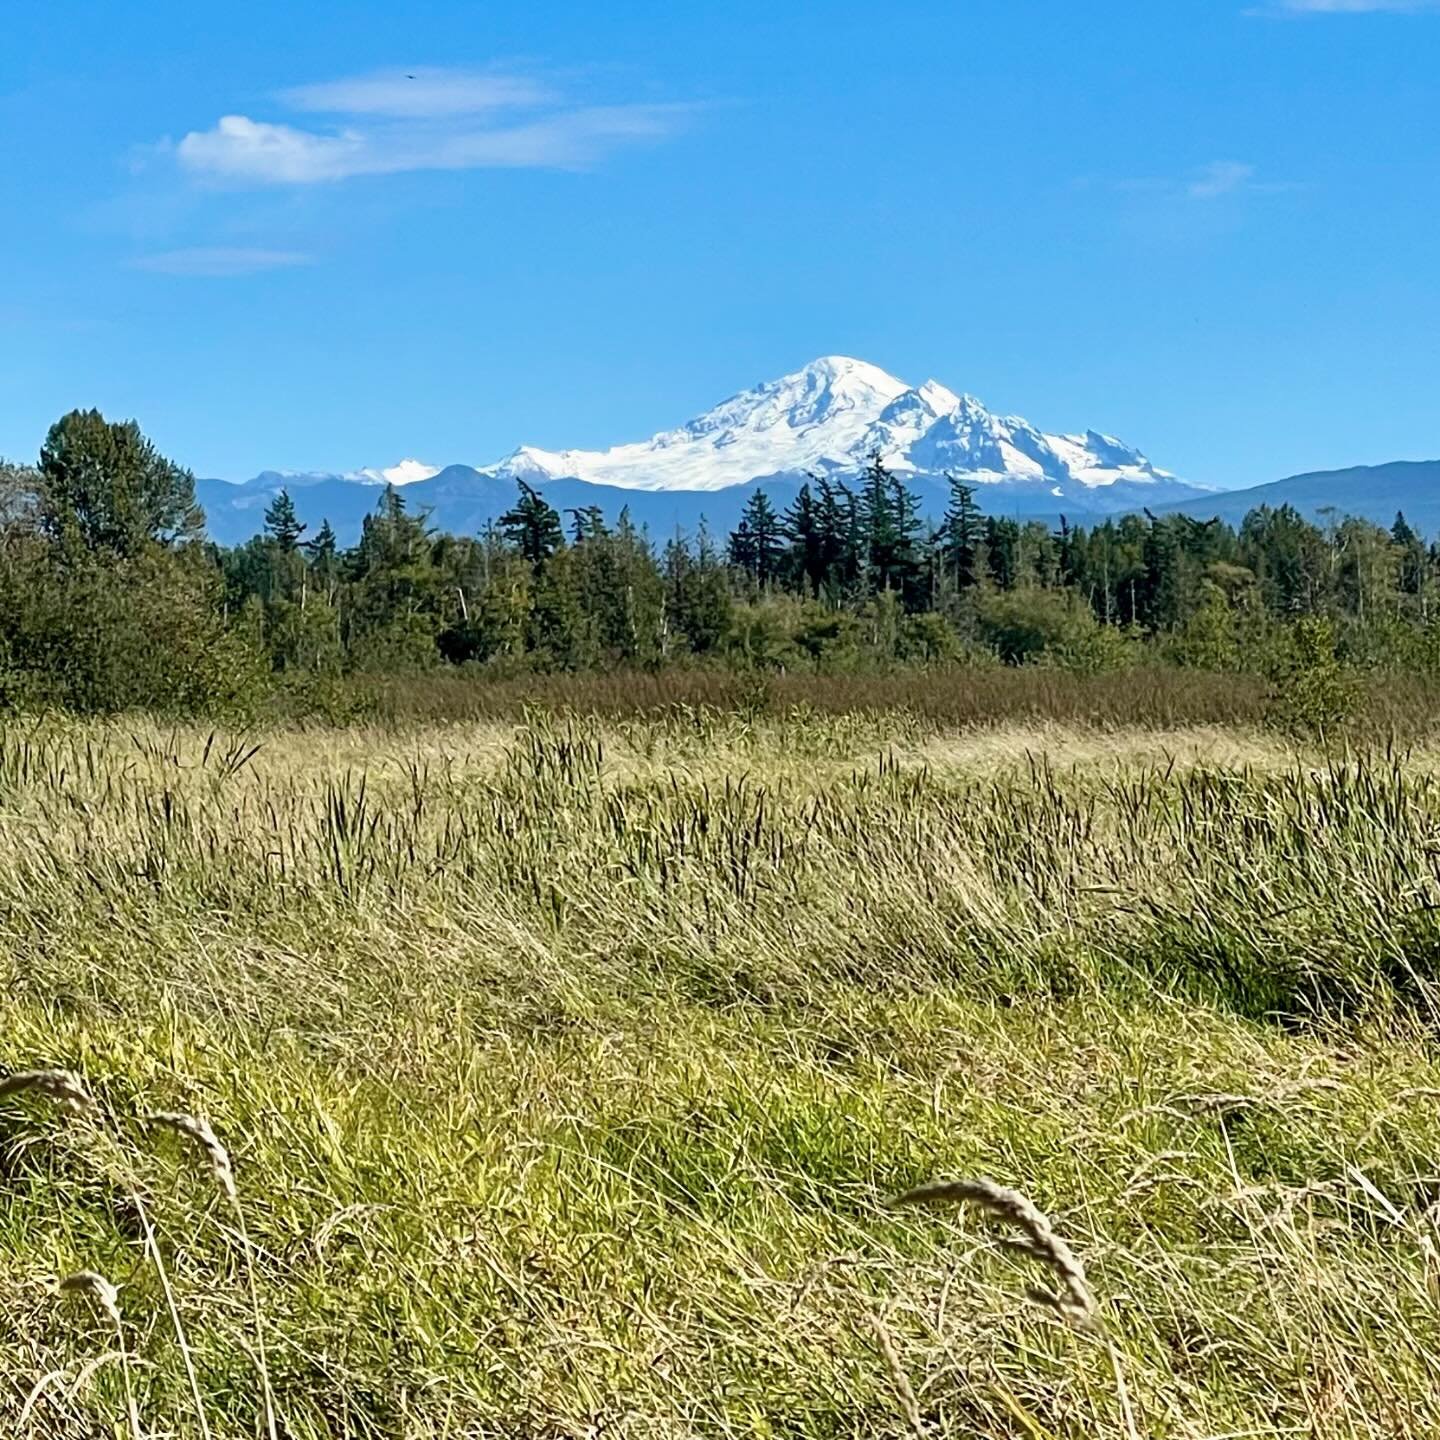 Tennant Lake in Ferndale is a wonderful place to enjoy a lovely fragrance garden full of blooming flowers and a cool boardwalk trail through the wetlands that&rsquo;s only a 0.7 mile loop. On clear sunny days, you can see majestic Mount Baker looming